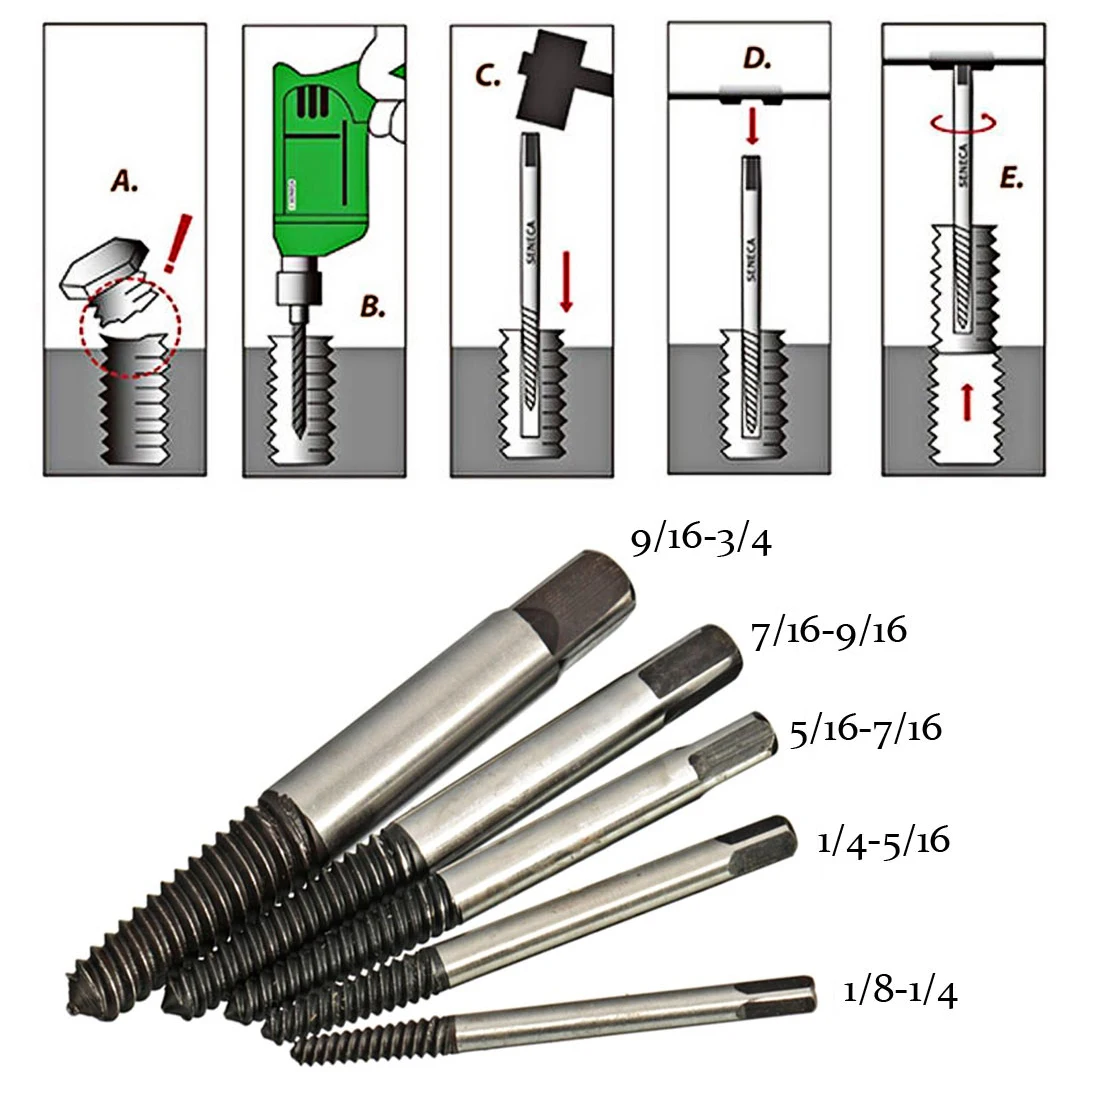 US $3.08 25% OFF|5Pcs/set Screw Extractor Easy Out Set Drill Bit Set Guide ...